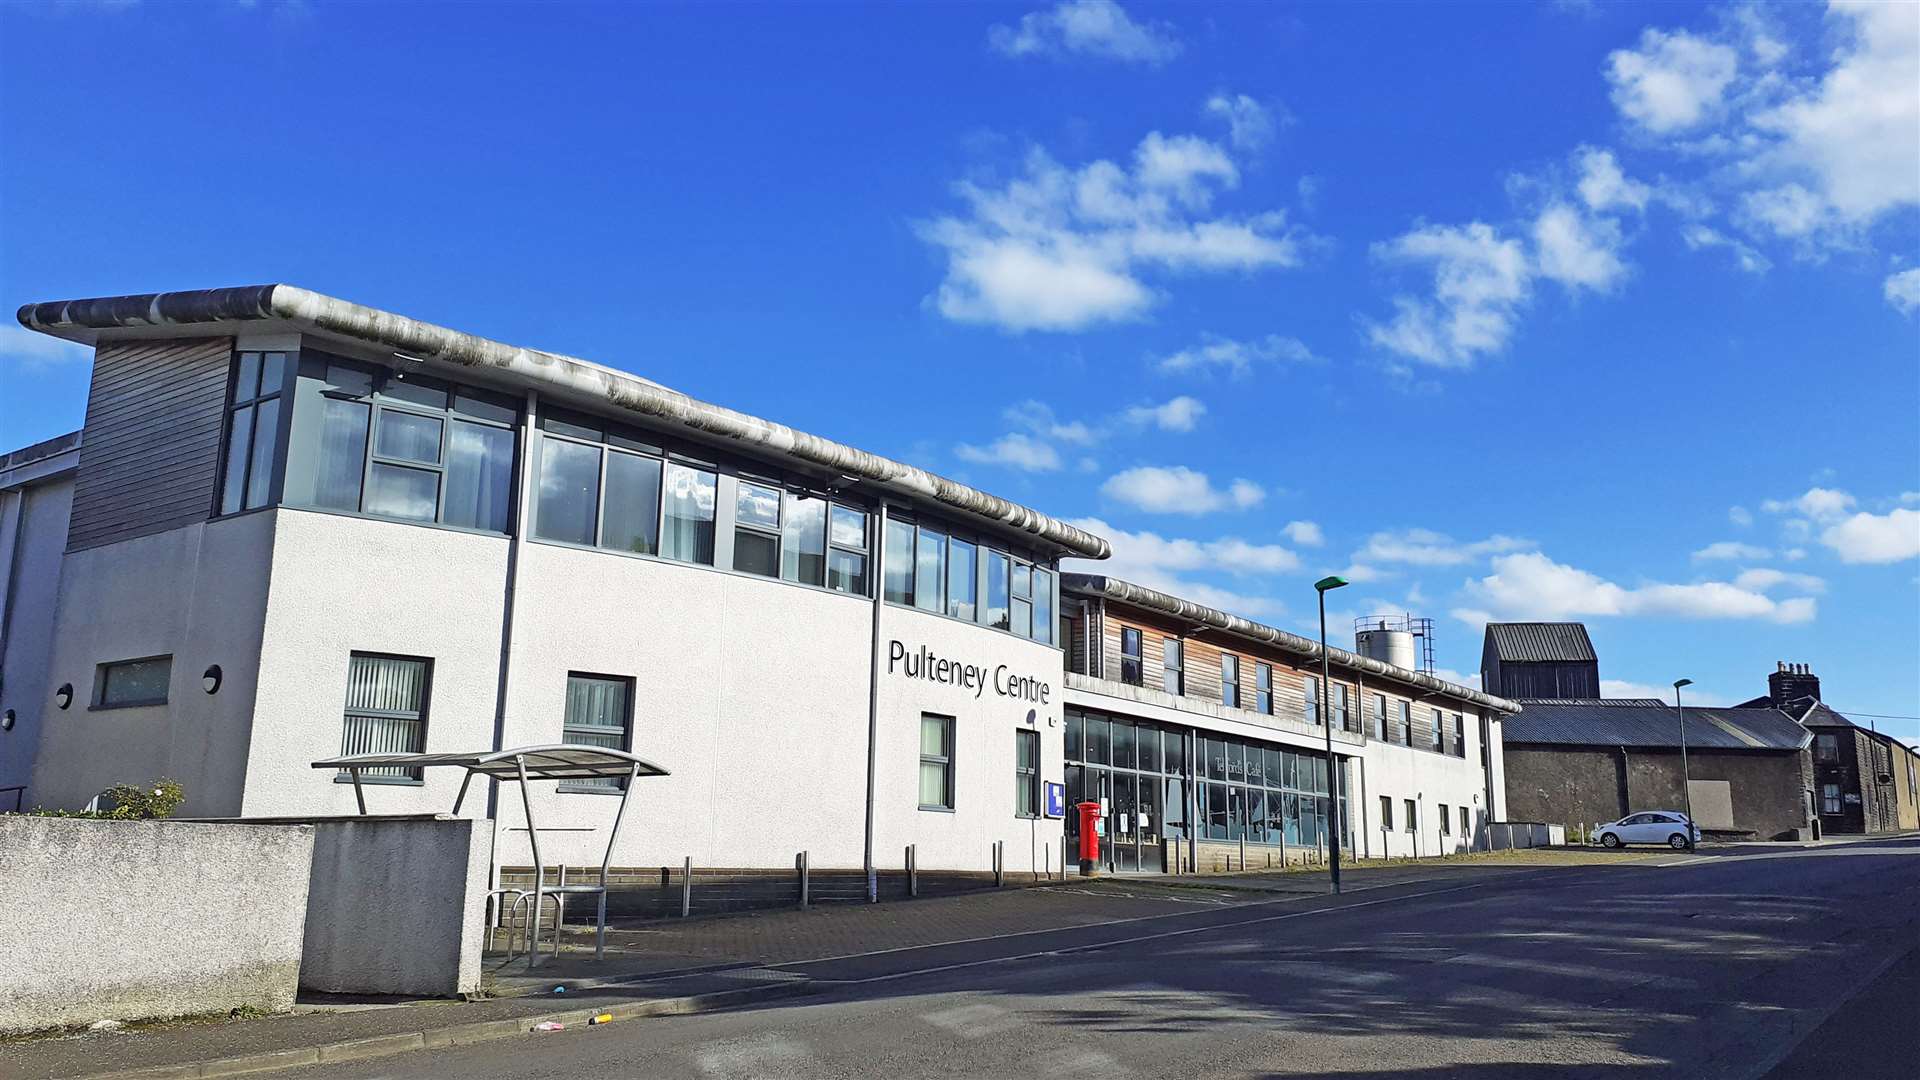 The Pulteney Centre in Huddart Street, Wick. The Pulteneytown People’s Project services based there helped David after the fire.